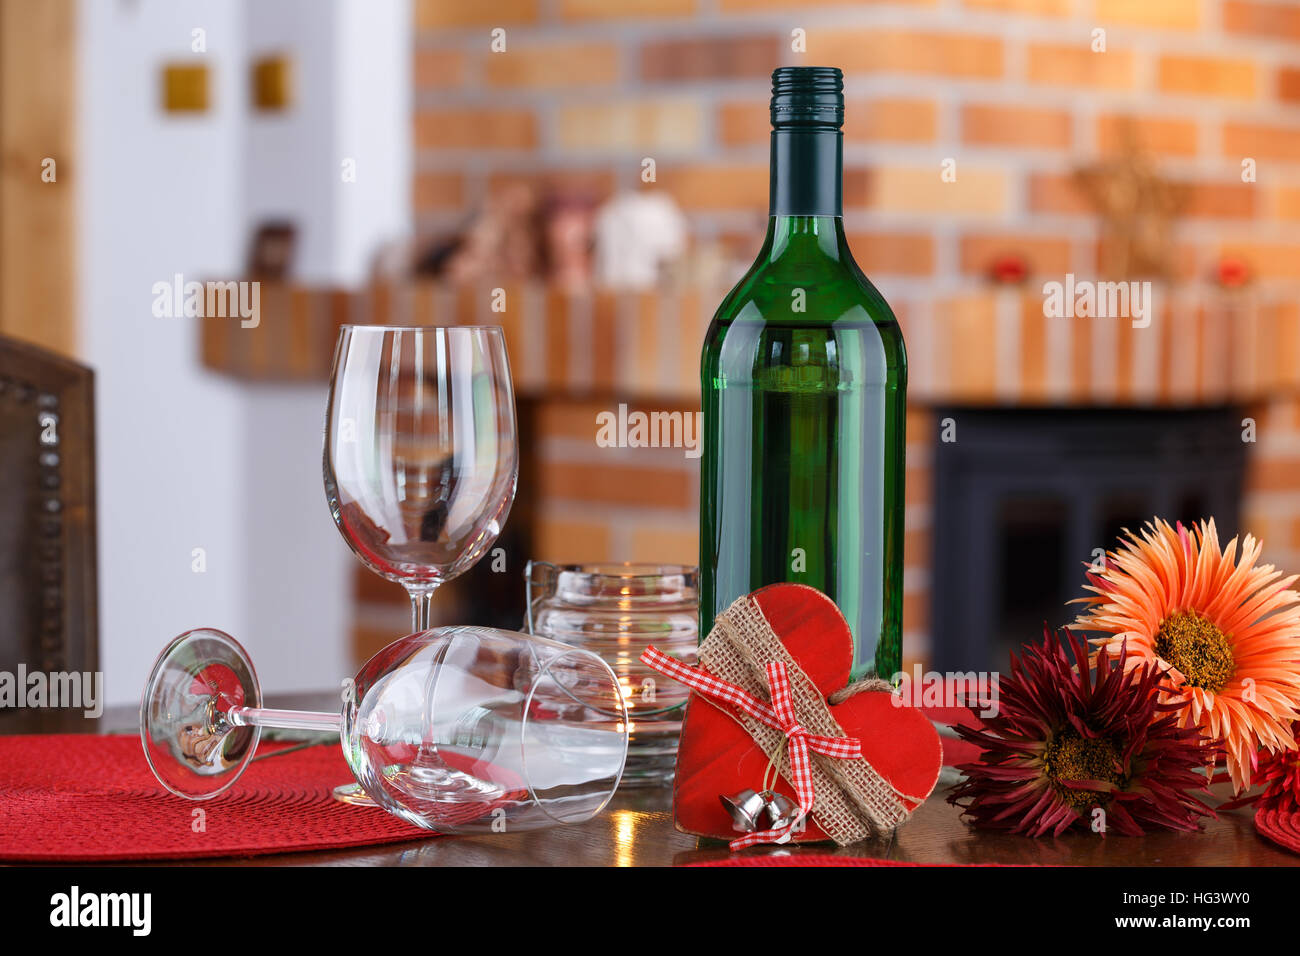 Still life with wine bottles, glasses, flowers and heart symbol, on the background a brick fireplace Stock Photo